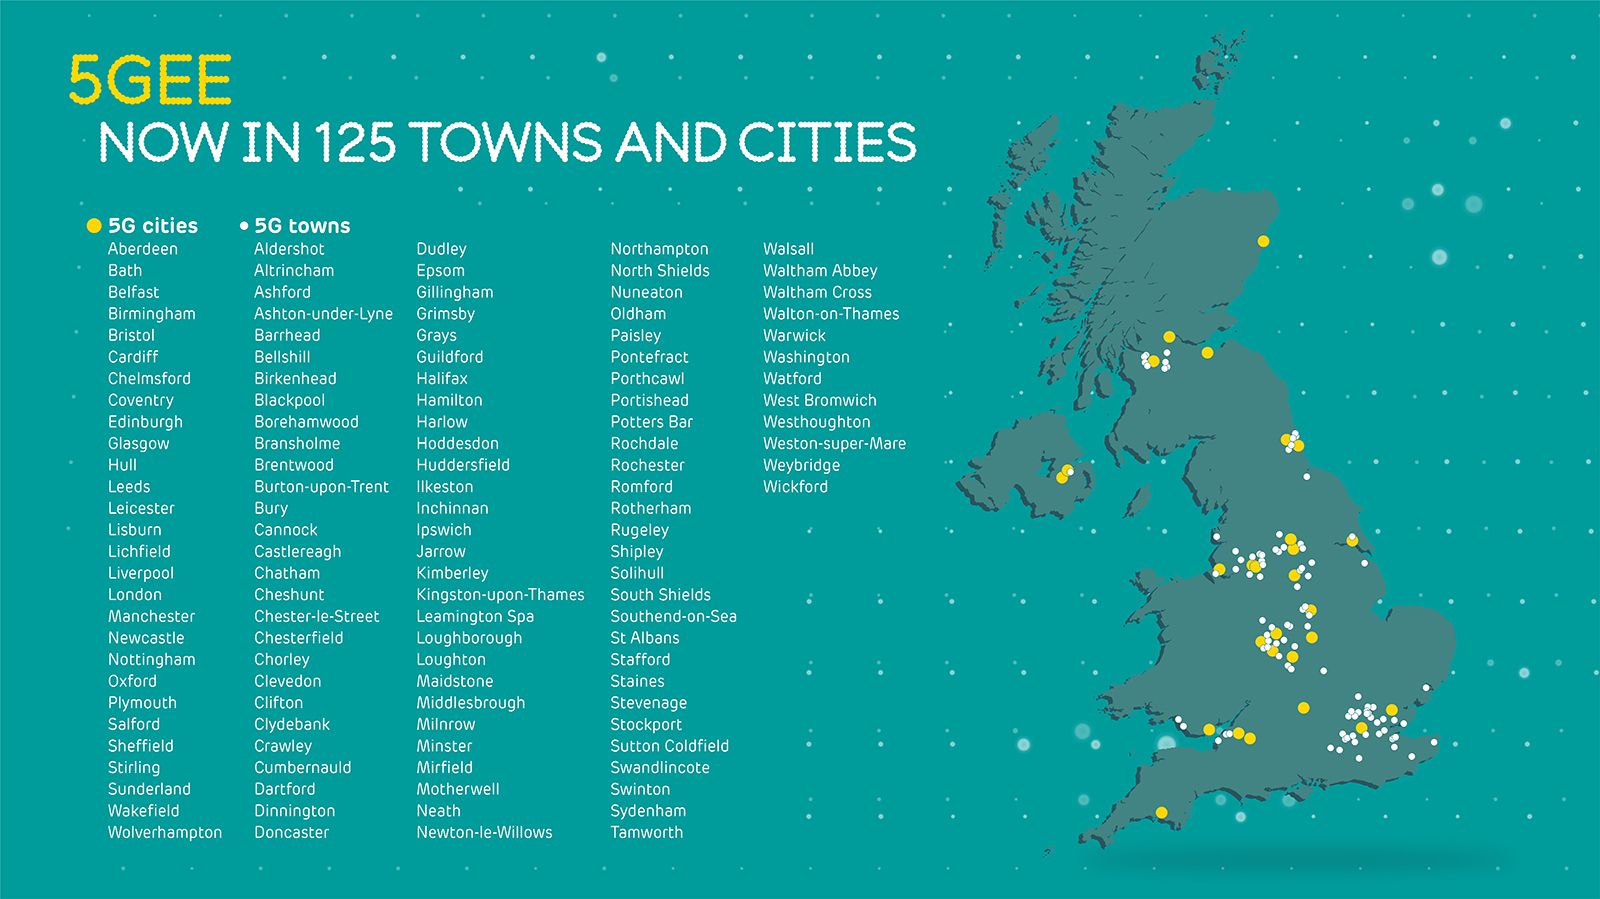 EE's 5G rollout continues, 13 new UK towns added to coverage list photo 2